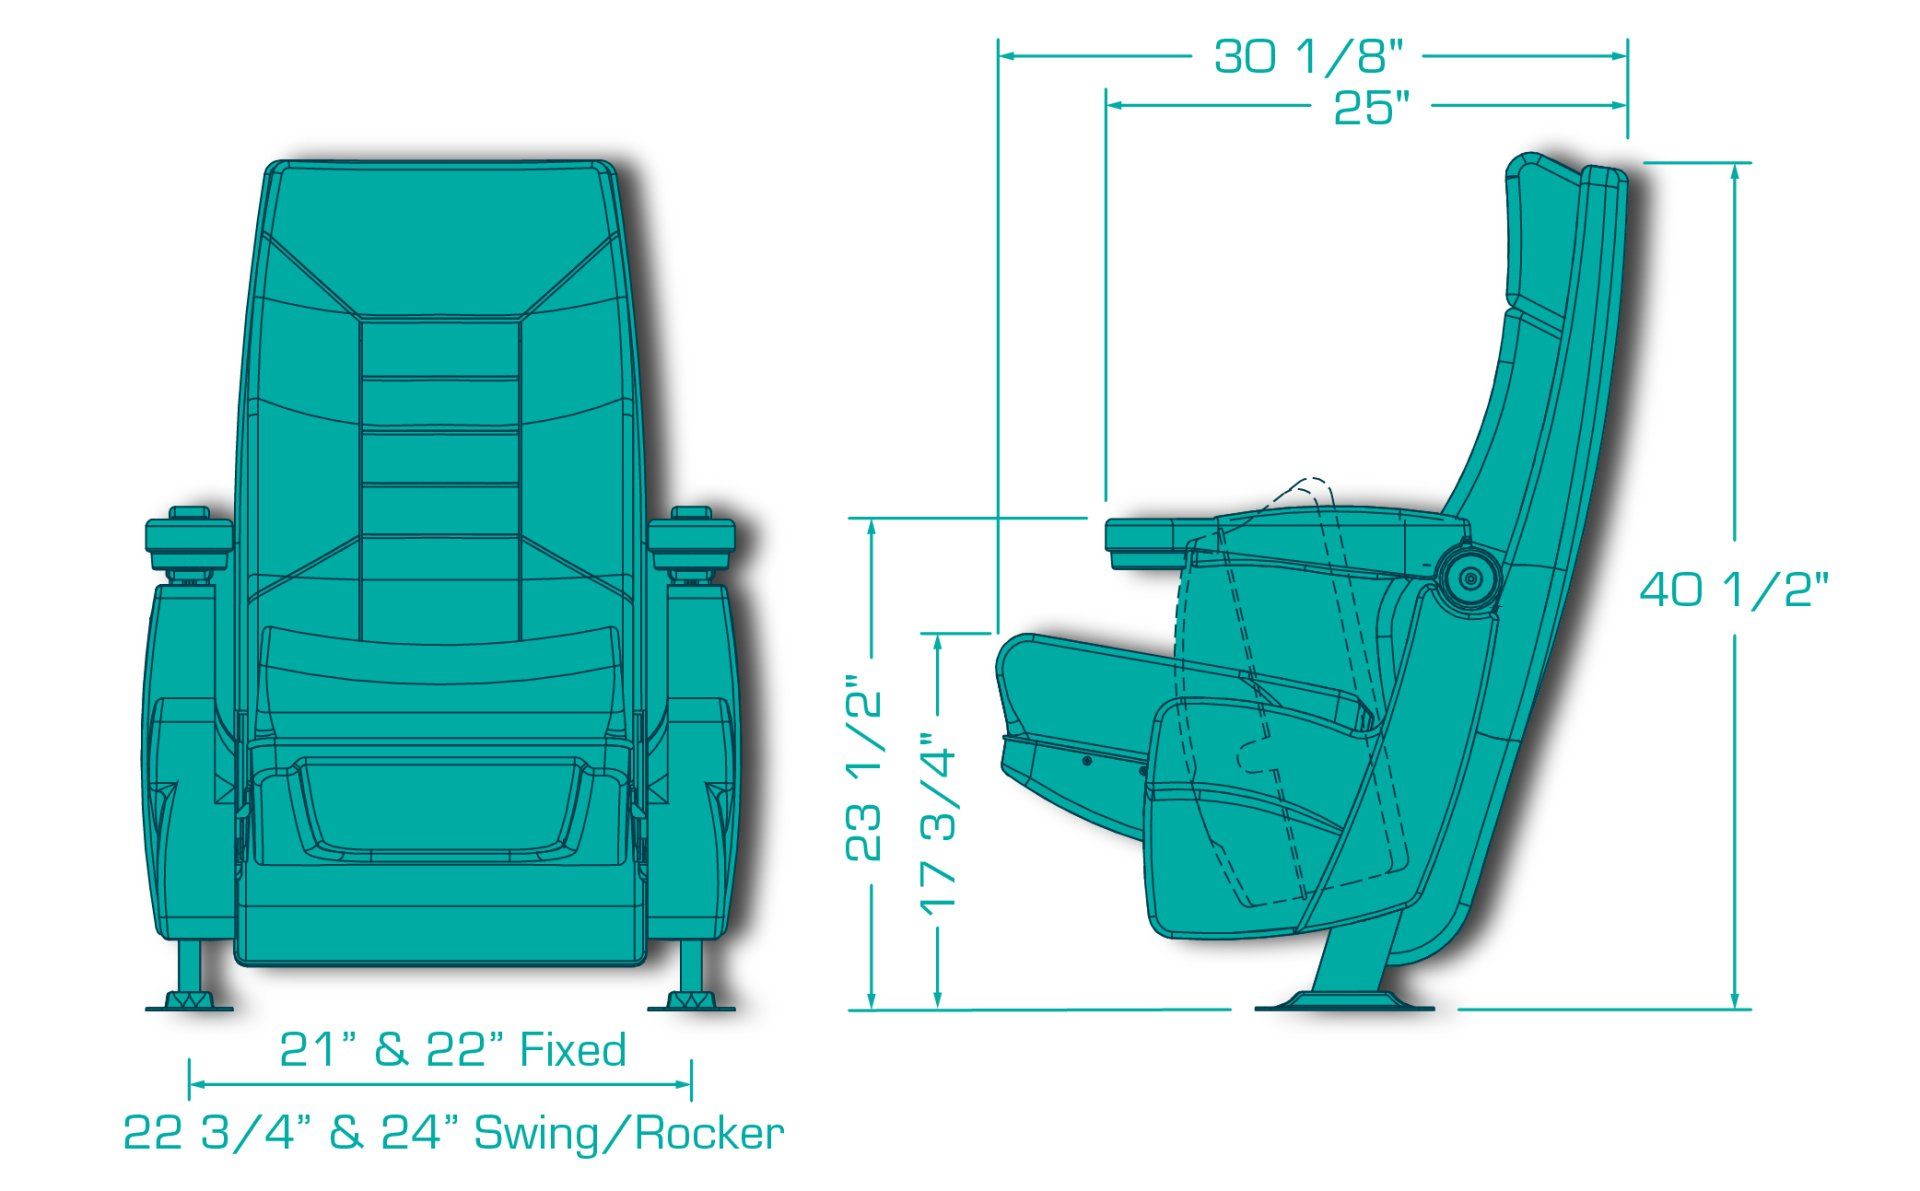 Dimensional drawing for the Venecia Rocker Venice Paladin commercial theater chair for theaters and home theaters